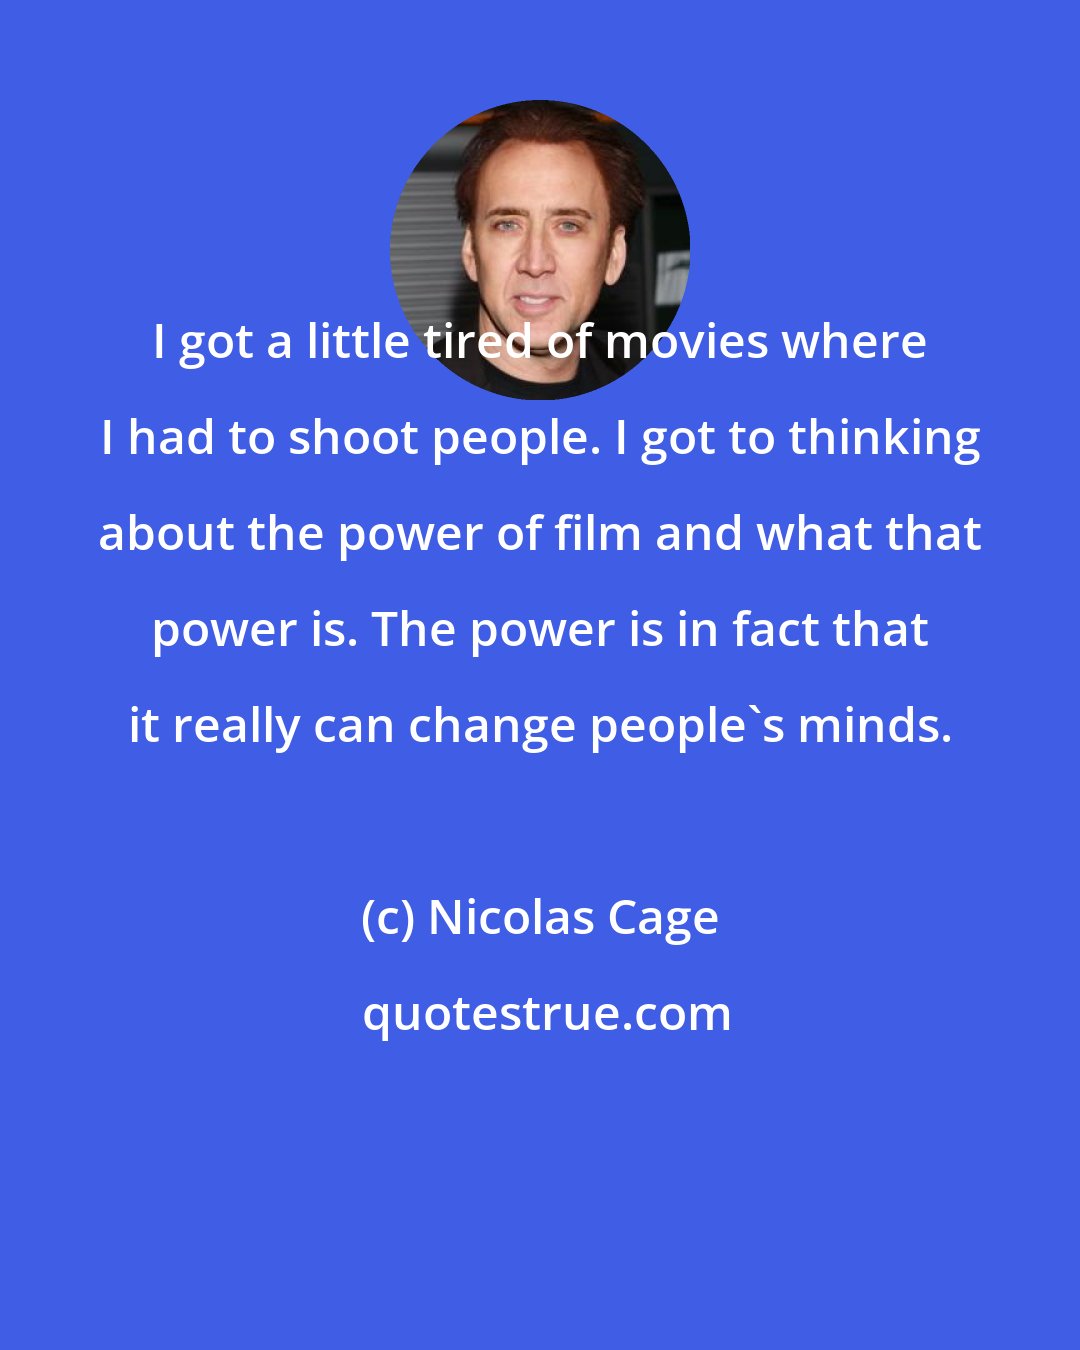 Nicolas Cage: I got a little tired of movies where I had to shoot people. I got to thinking about the power of film and what that power is. The power is in fact that it really can change people's minds.